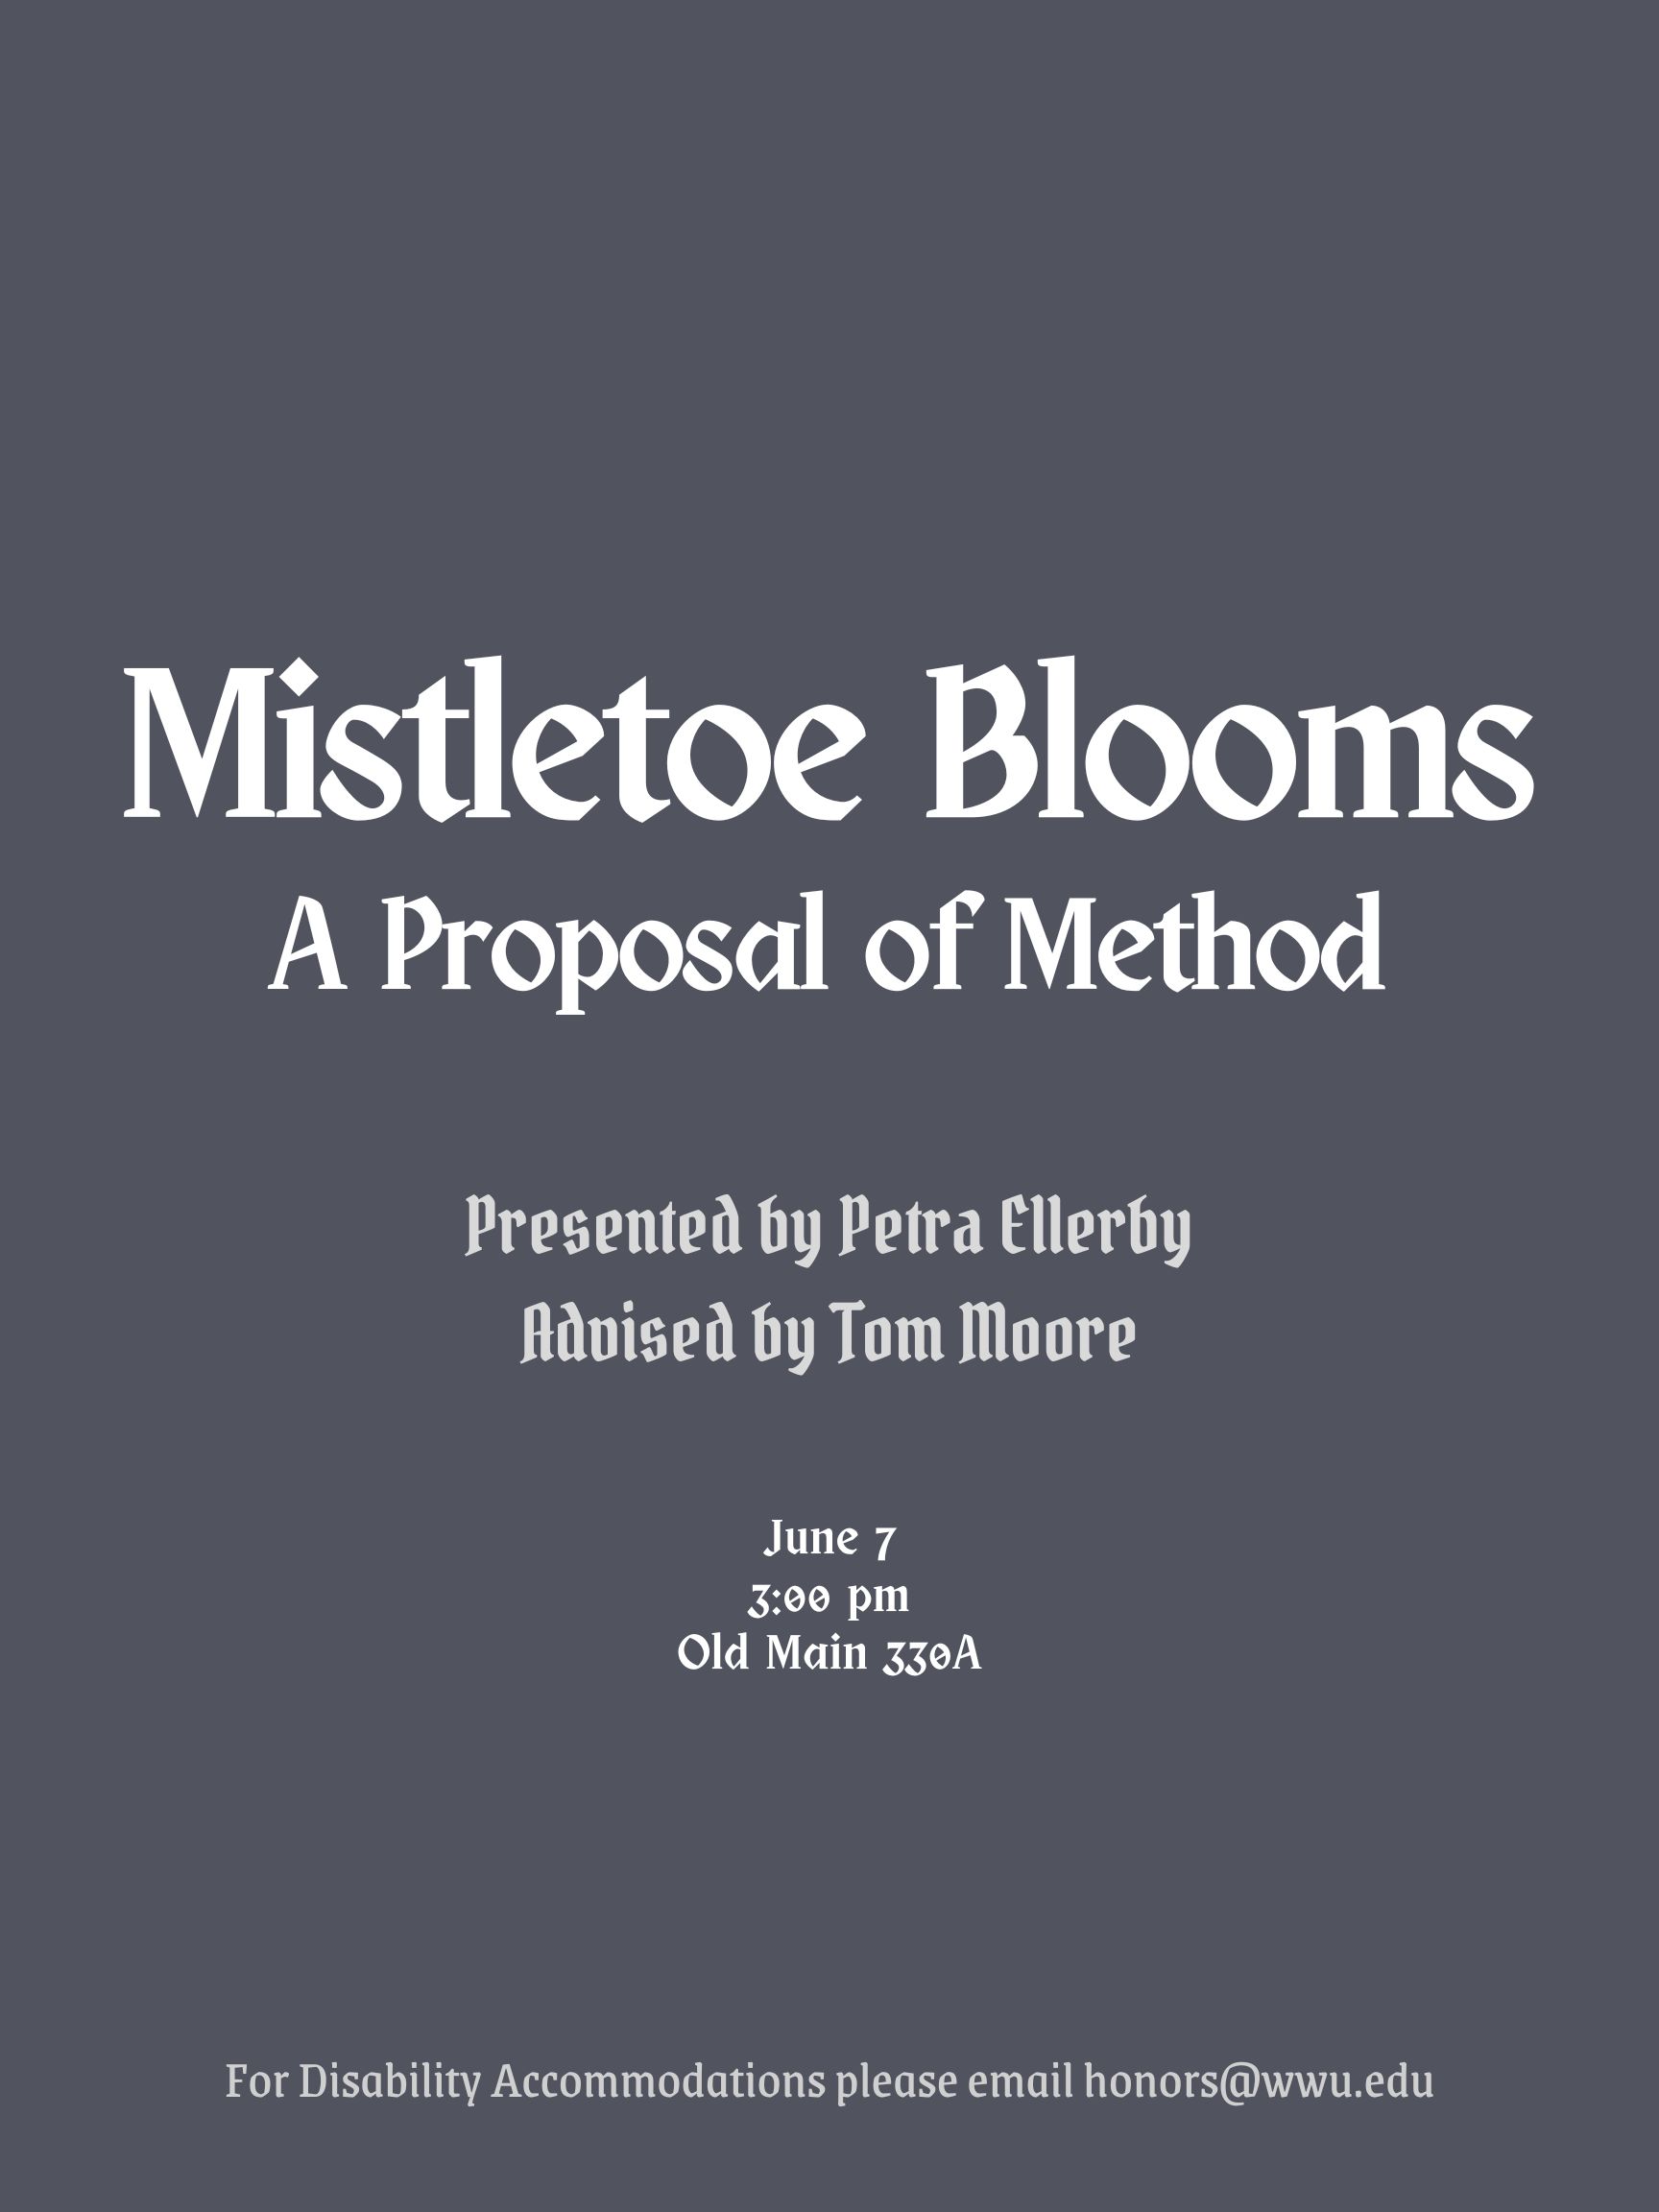 A grey poster with text reading: "Mistletoe Blooms: A Proposal of Method. Presented by Petra Ellerby. Advised by Tom Moore. June 7. 3:00 pm. Old Main 330A. For Disability Accommodations please email honors@wwu.edu."